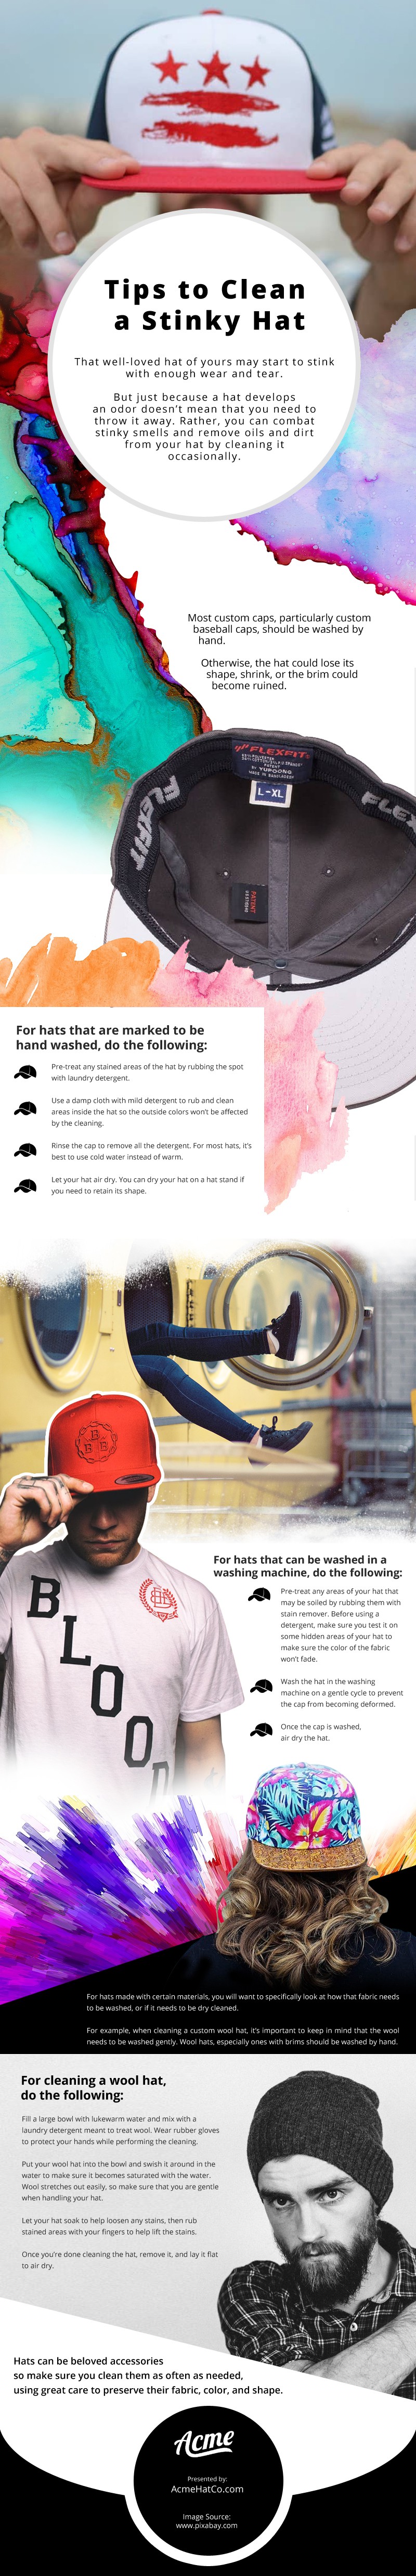 Tips to Clean a Stinky Hat Infographic